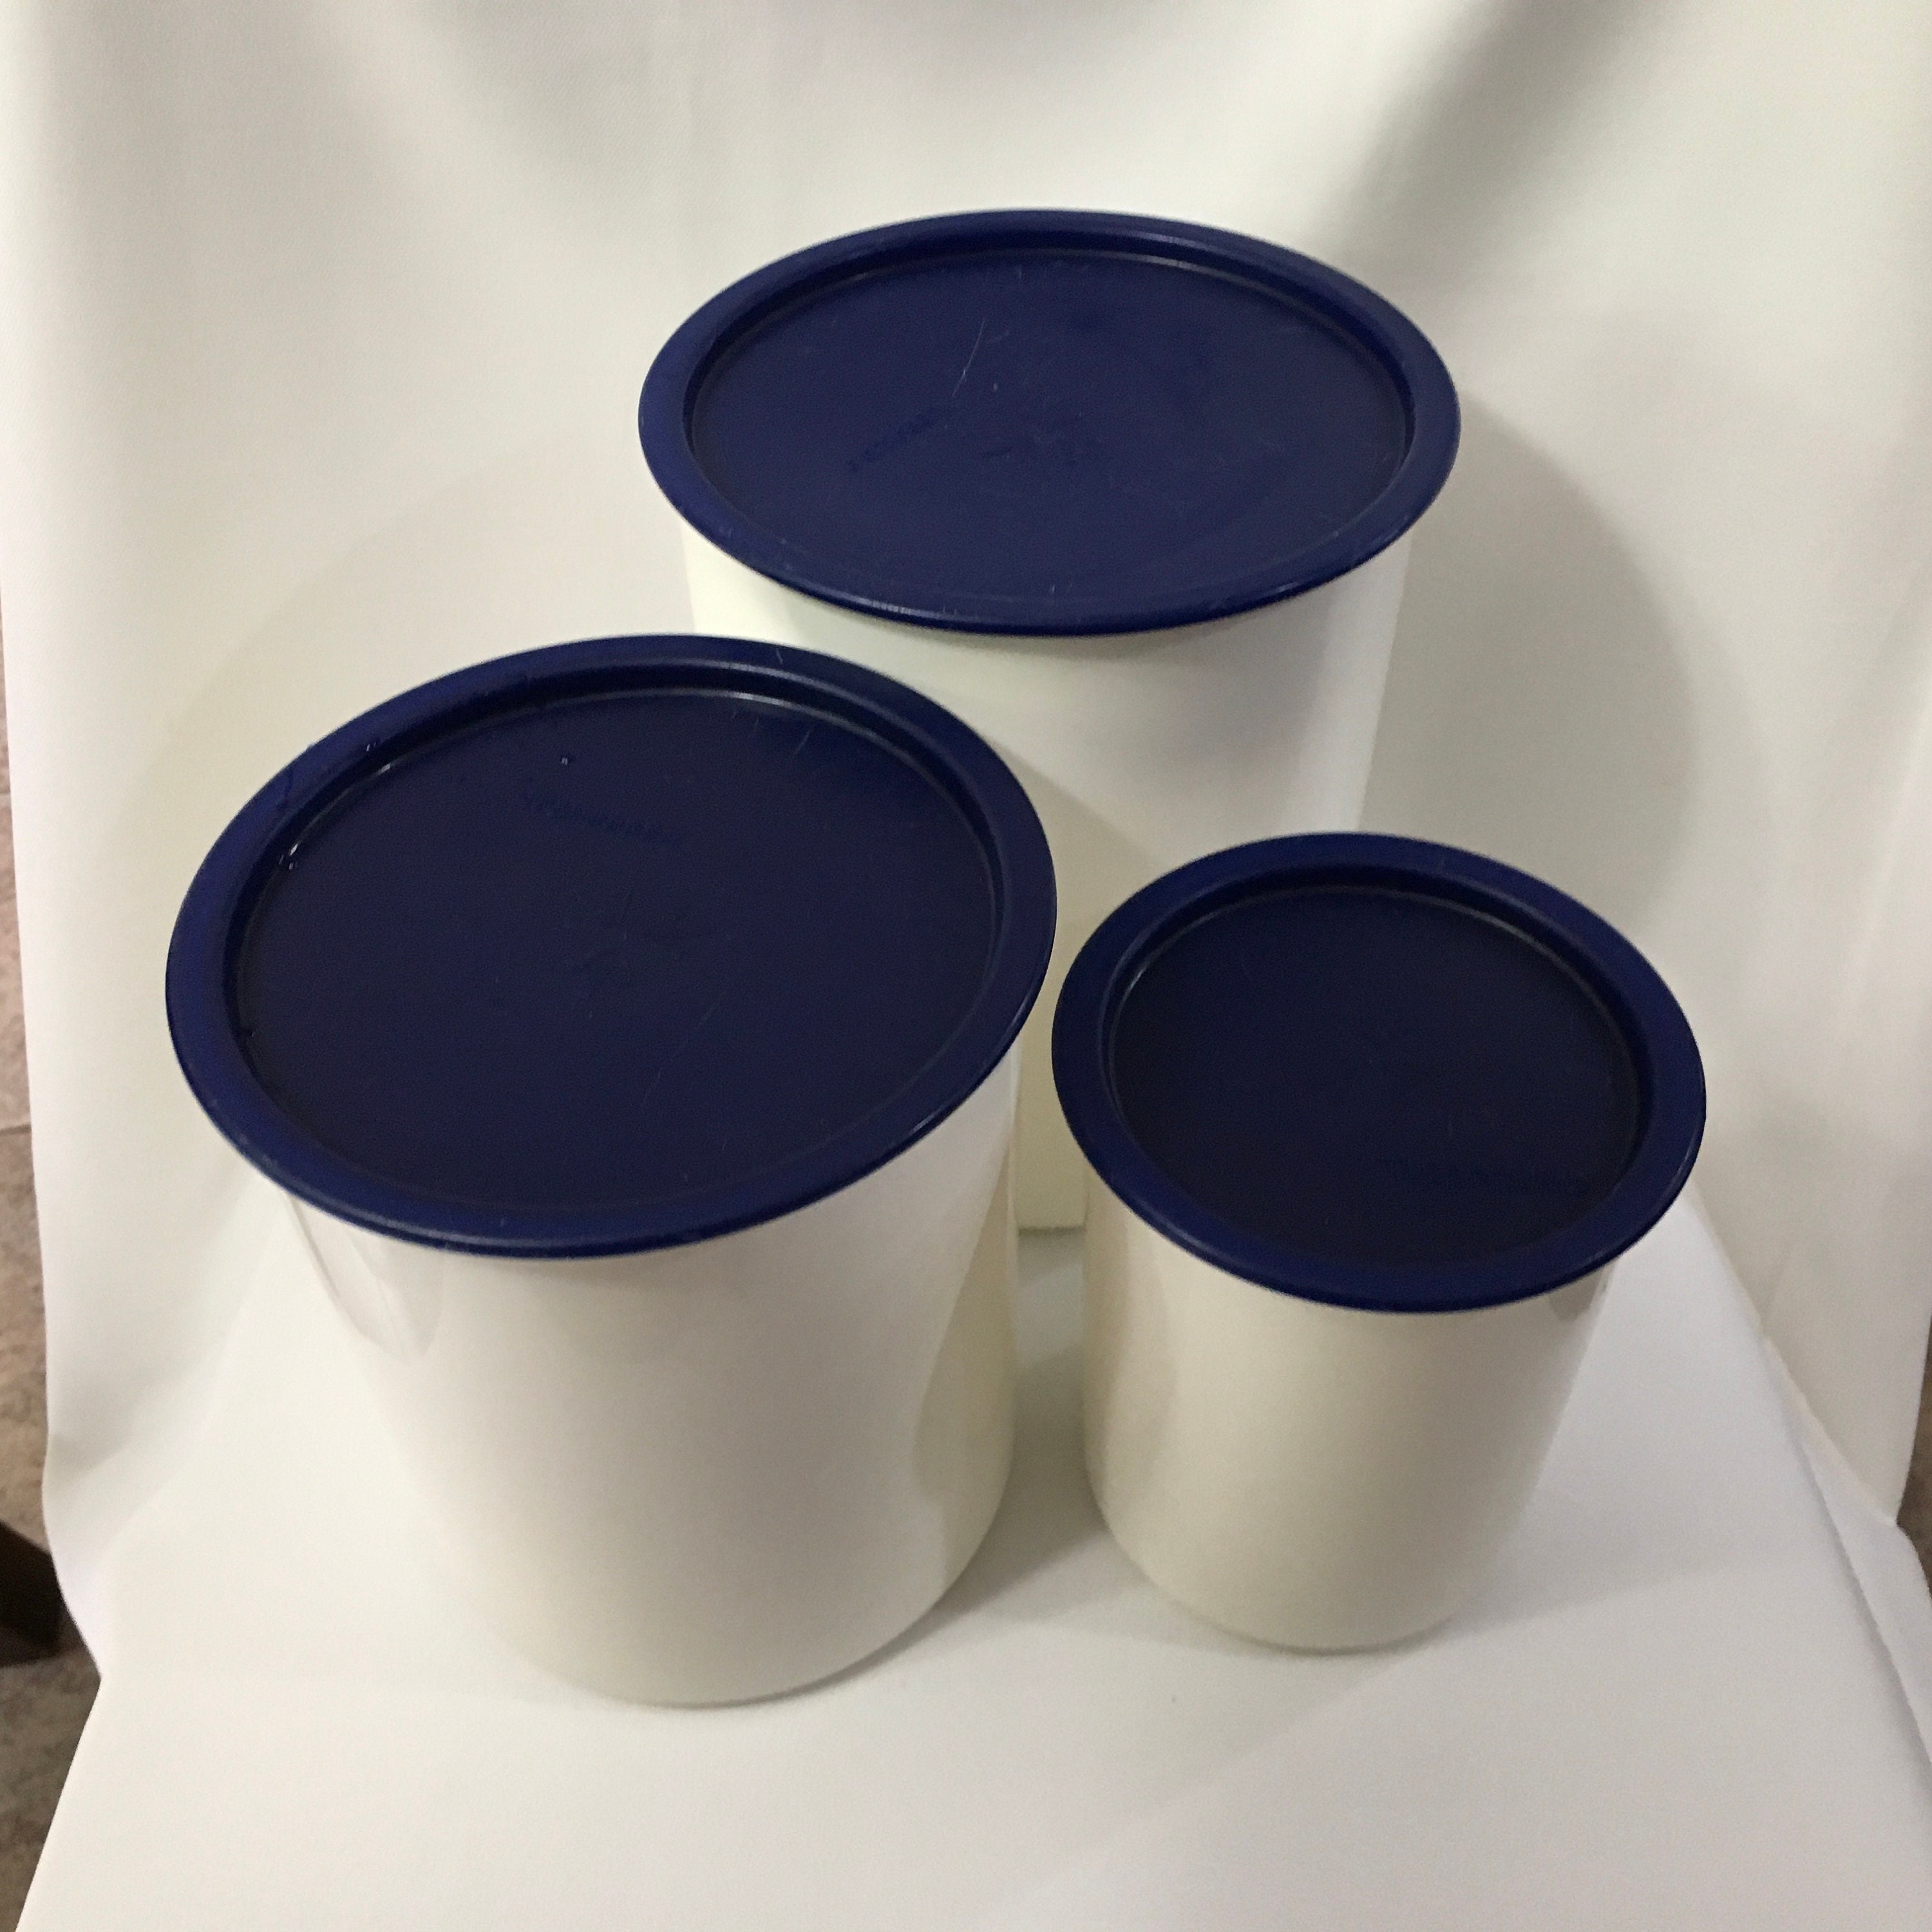 vintage tupperware canisters dark blue set of 4 with lids w/ creamer  container